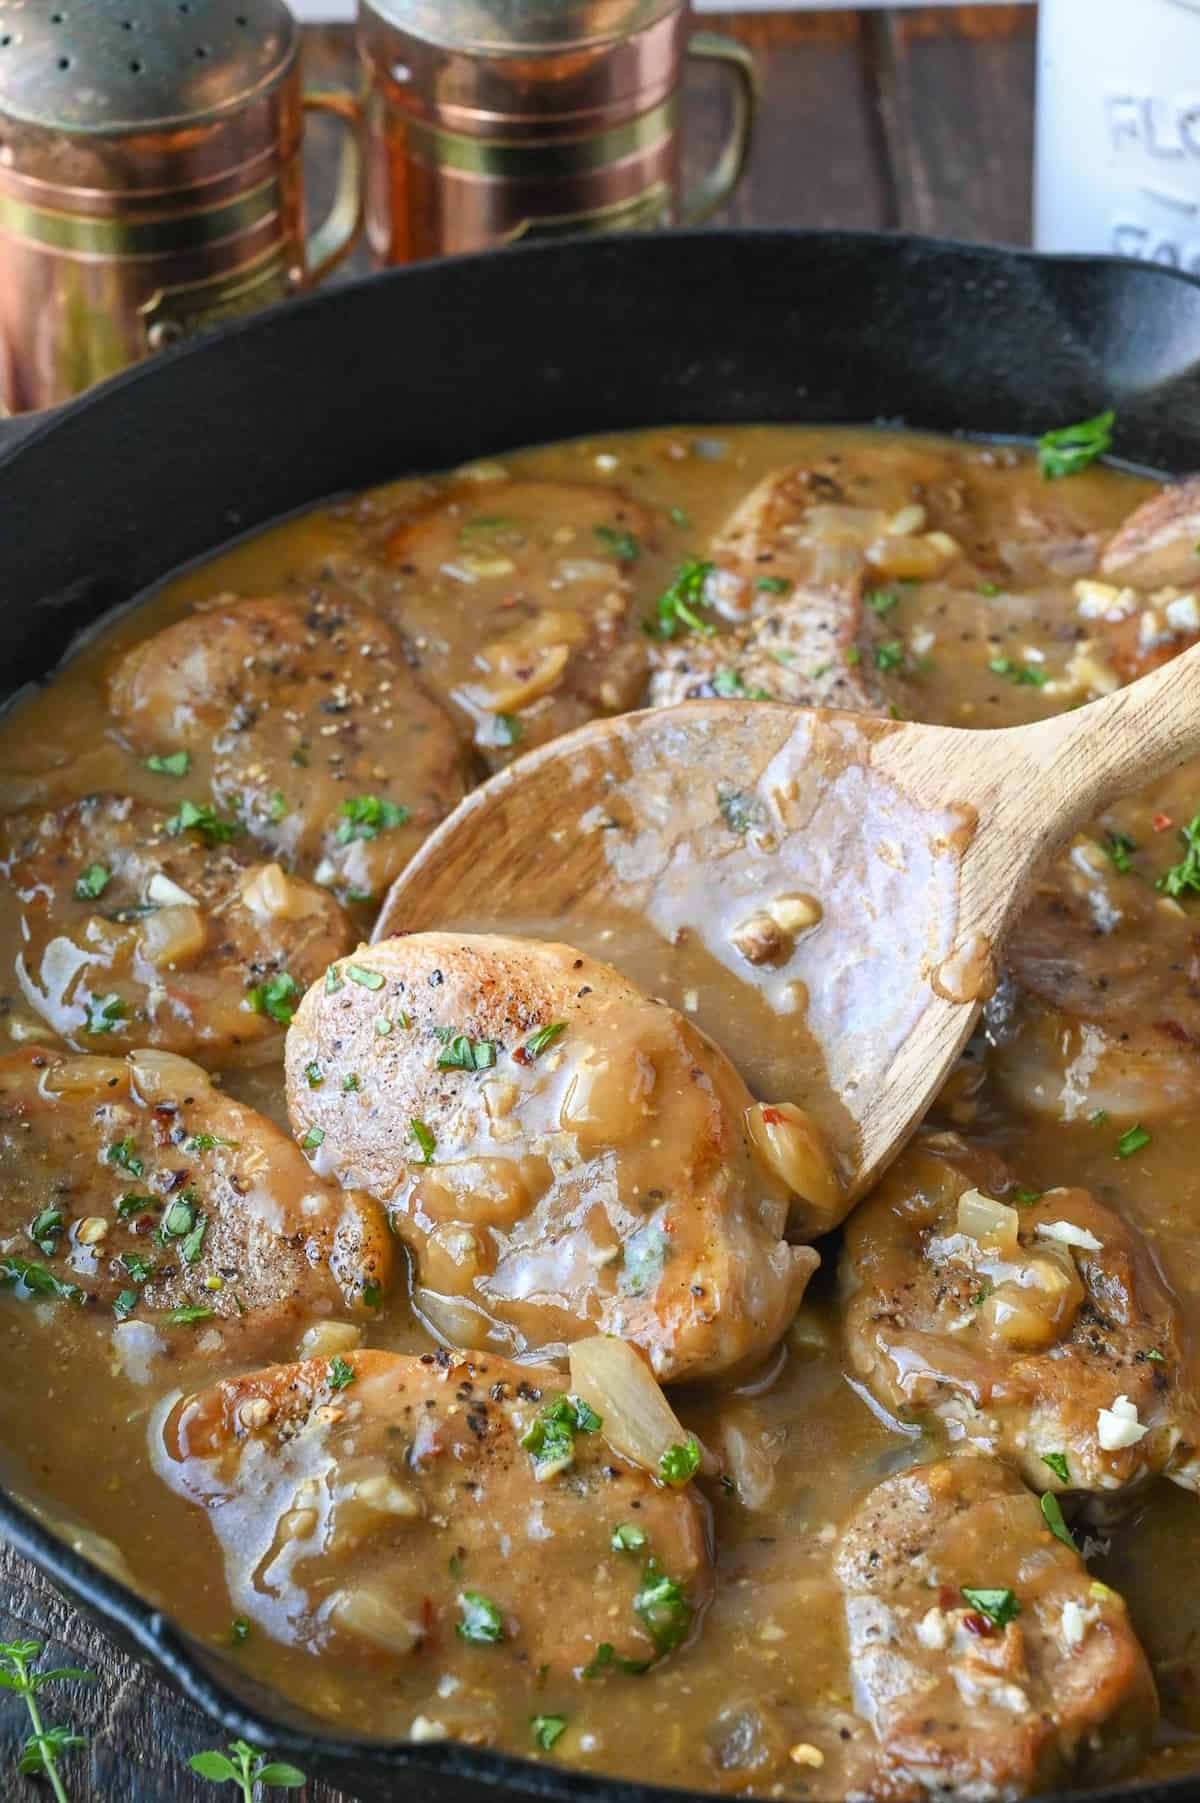 Using a wooden spoon to mix pork medallions in gravy.